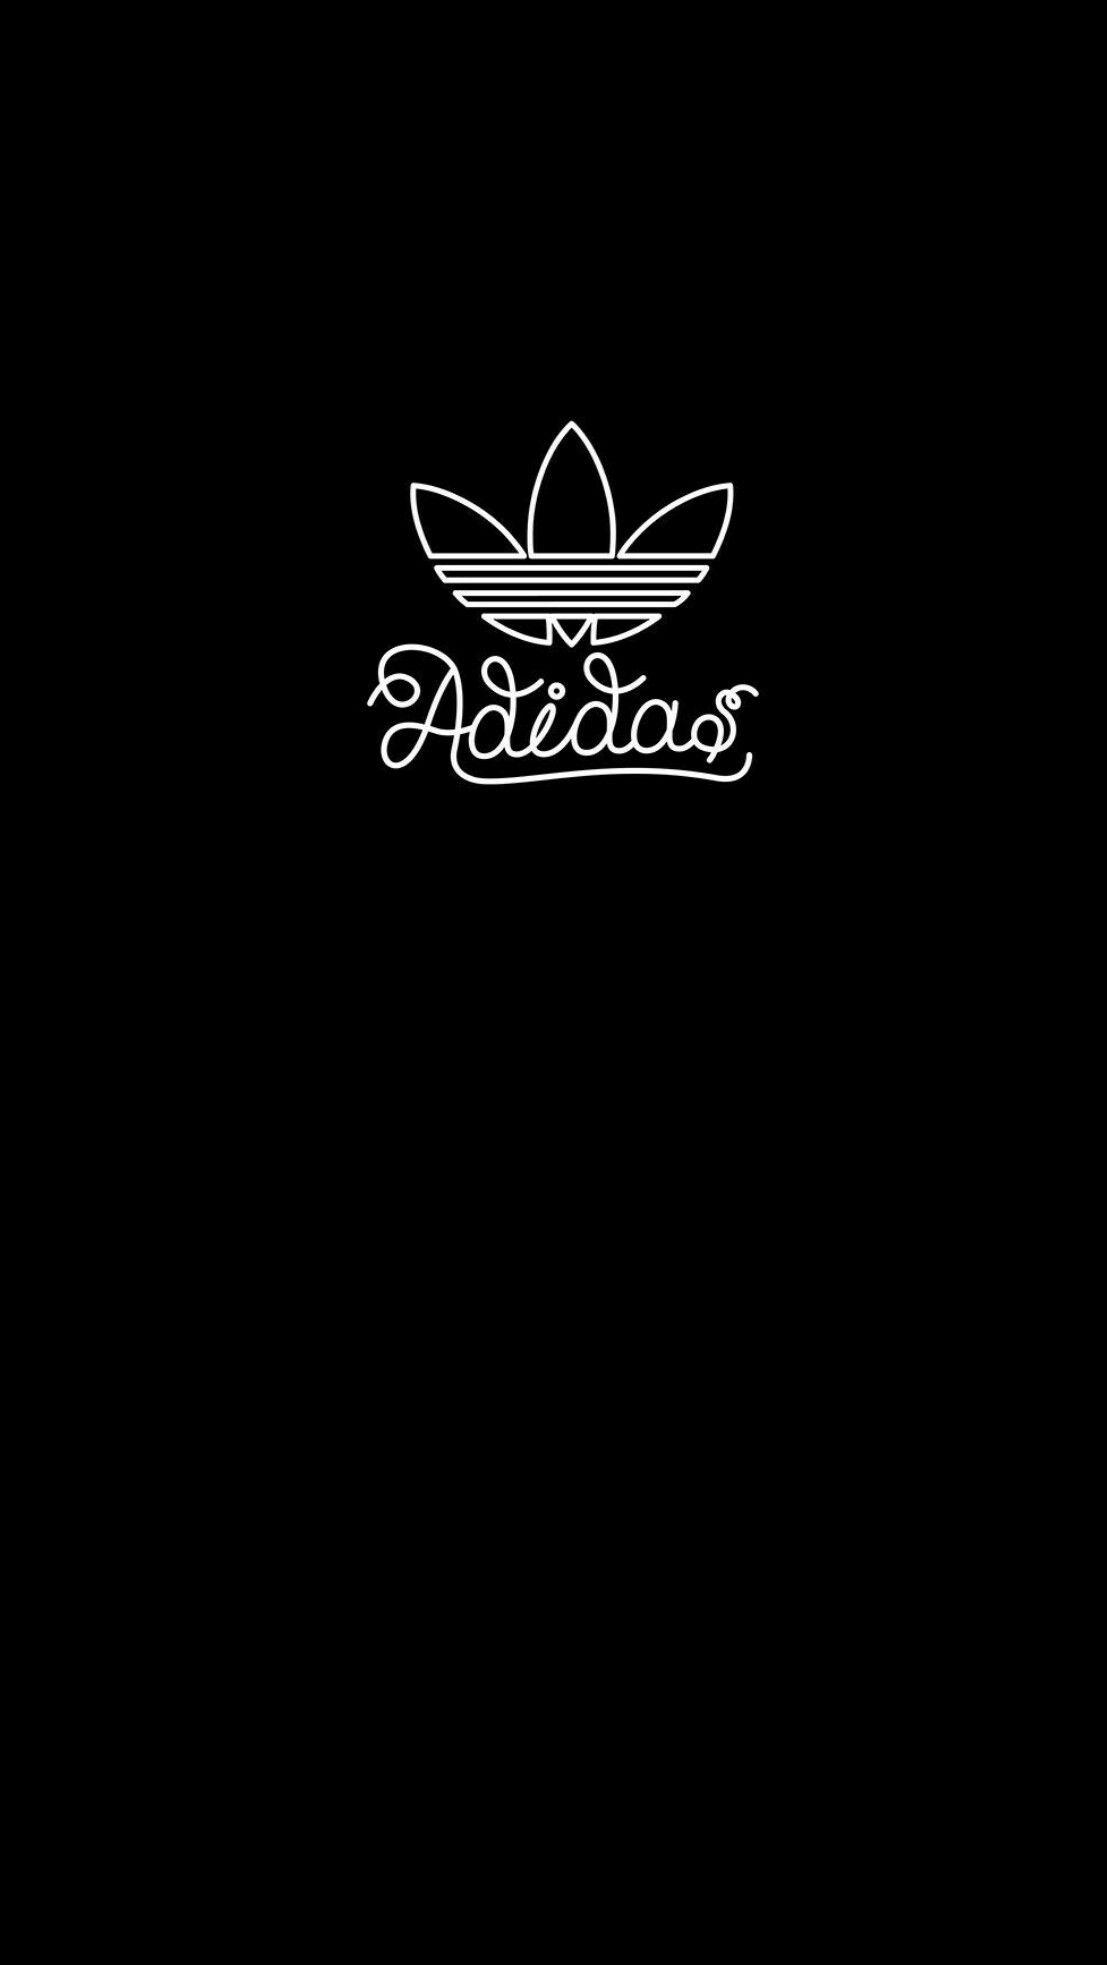 Adidas Black And White Wallpapers Top Free Adidas Black And White Backgrounds Wallpaperaccess